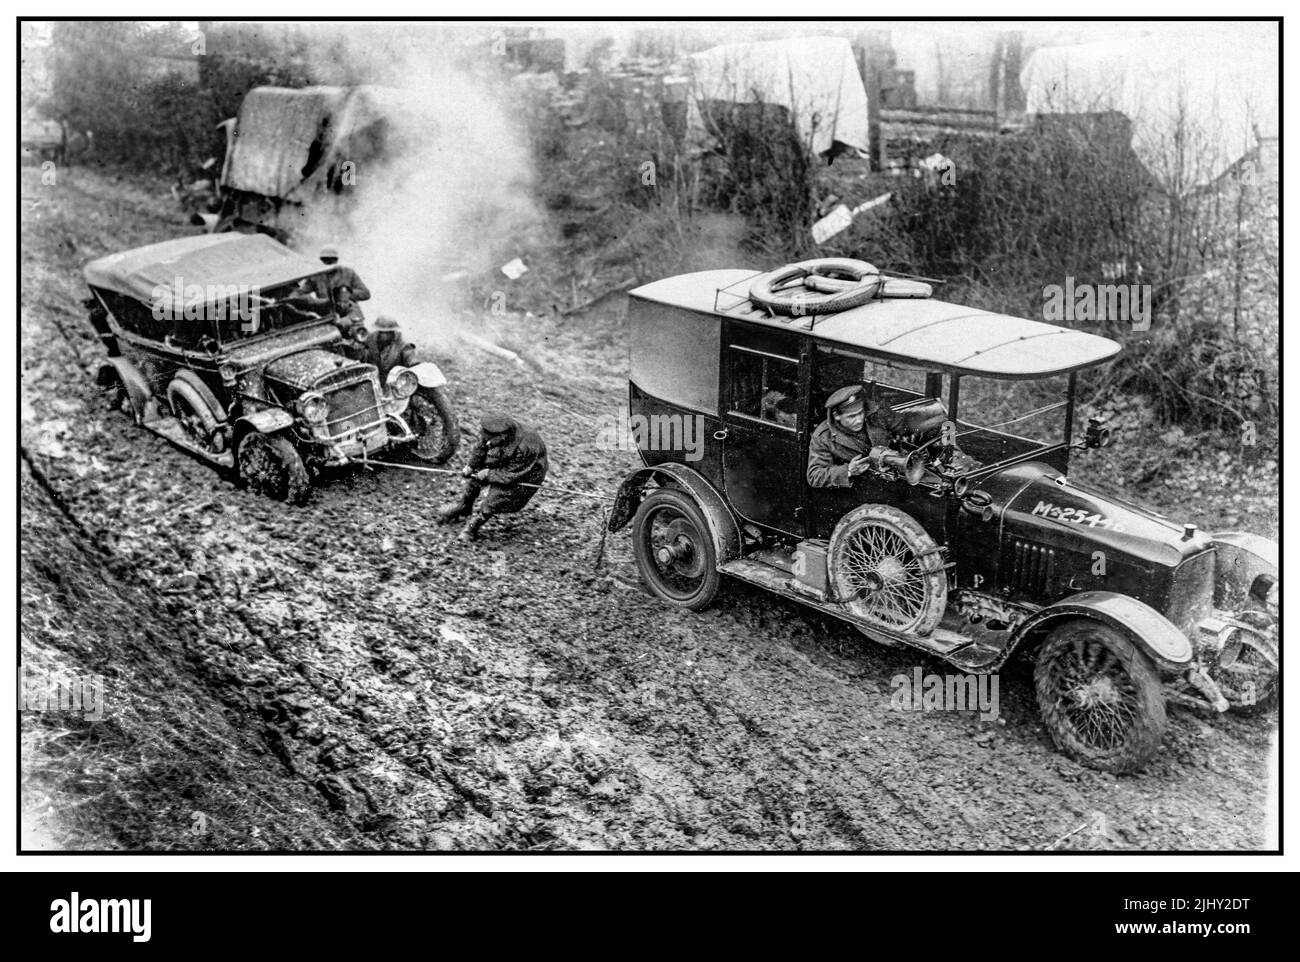 WW1 British Army on The Western Front in France with car being towed during World War I. This image shows a car being towed through thick mud. As the car in front tries to pull the other free, a soldier lends a hand by pulling on the tow rope. A group of soldiers standing next to the immovable car add their weight to the struggle. There appears to be a camp directly behind the road they are on. The car in front has the number 'M25446' painted on the bonnet. Extreme weather conditions, floods and deep mud that ensued, created tremendous logistical problems and hazards for the soldiers at the We Stock Photo